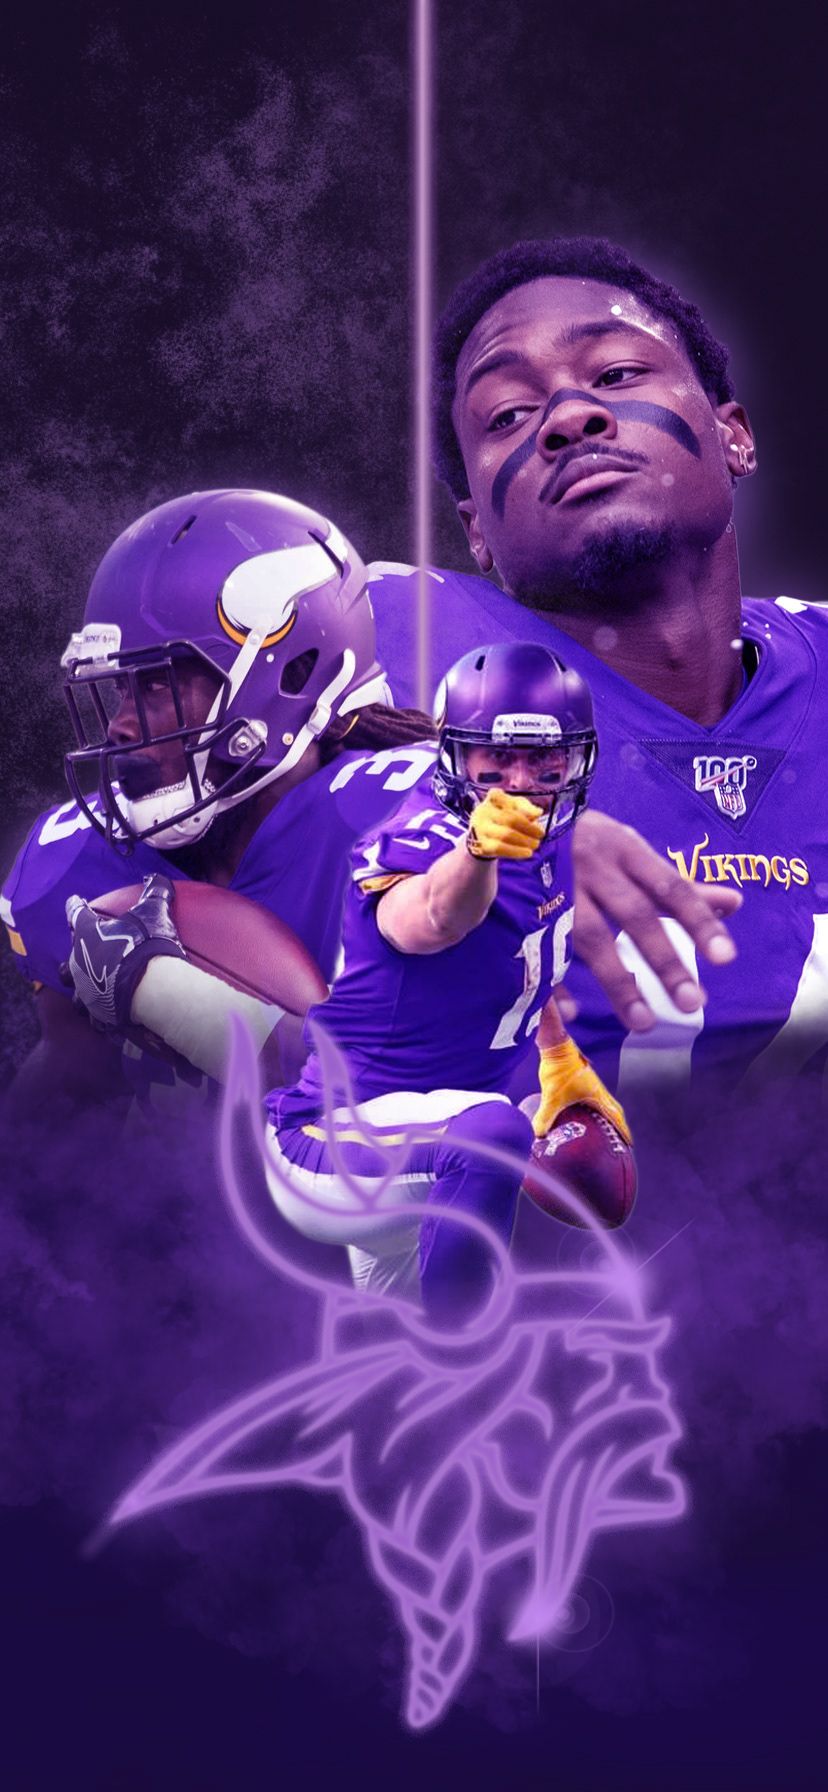 I couldnt find a simple iPhone wallpaper that had a plain purple  background with the Vikings logo on Google so I made one If anyone else  wants to use it feel free 